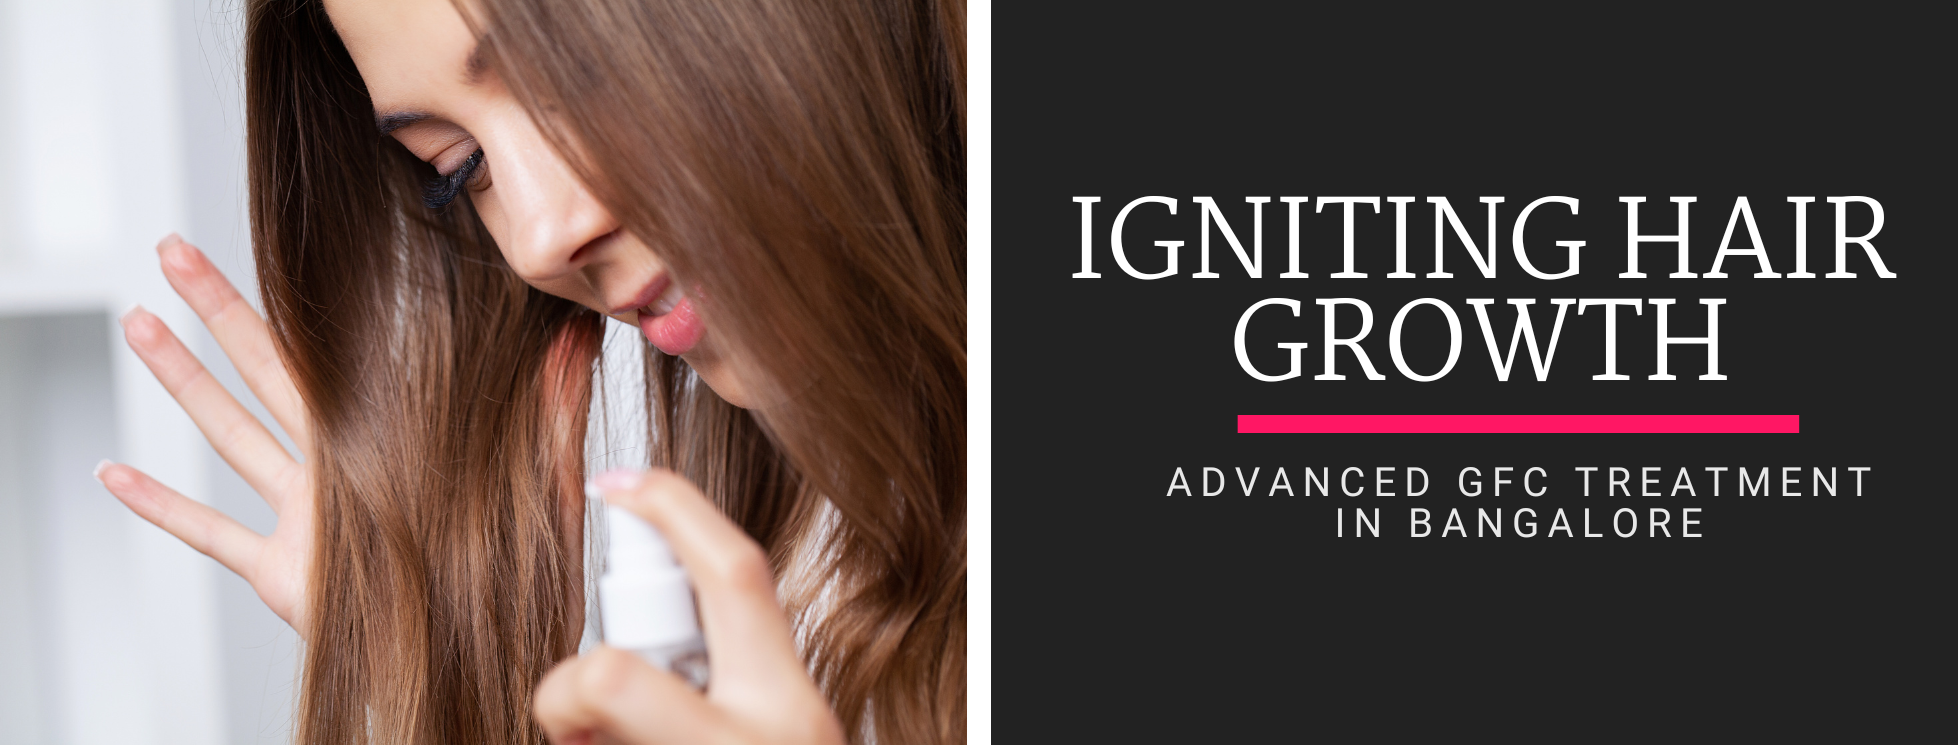 Igniting Hair Growth: Advanced GFC Treatment in Bangalore